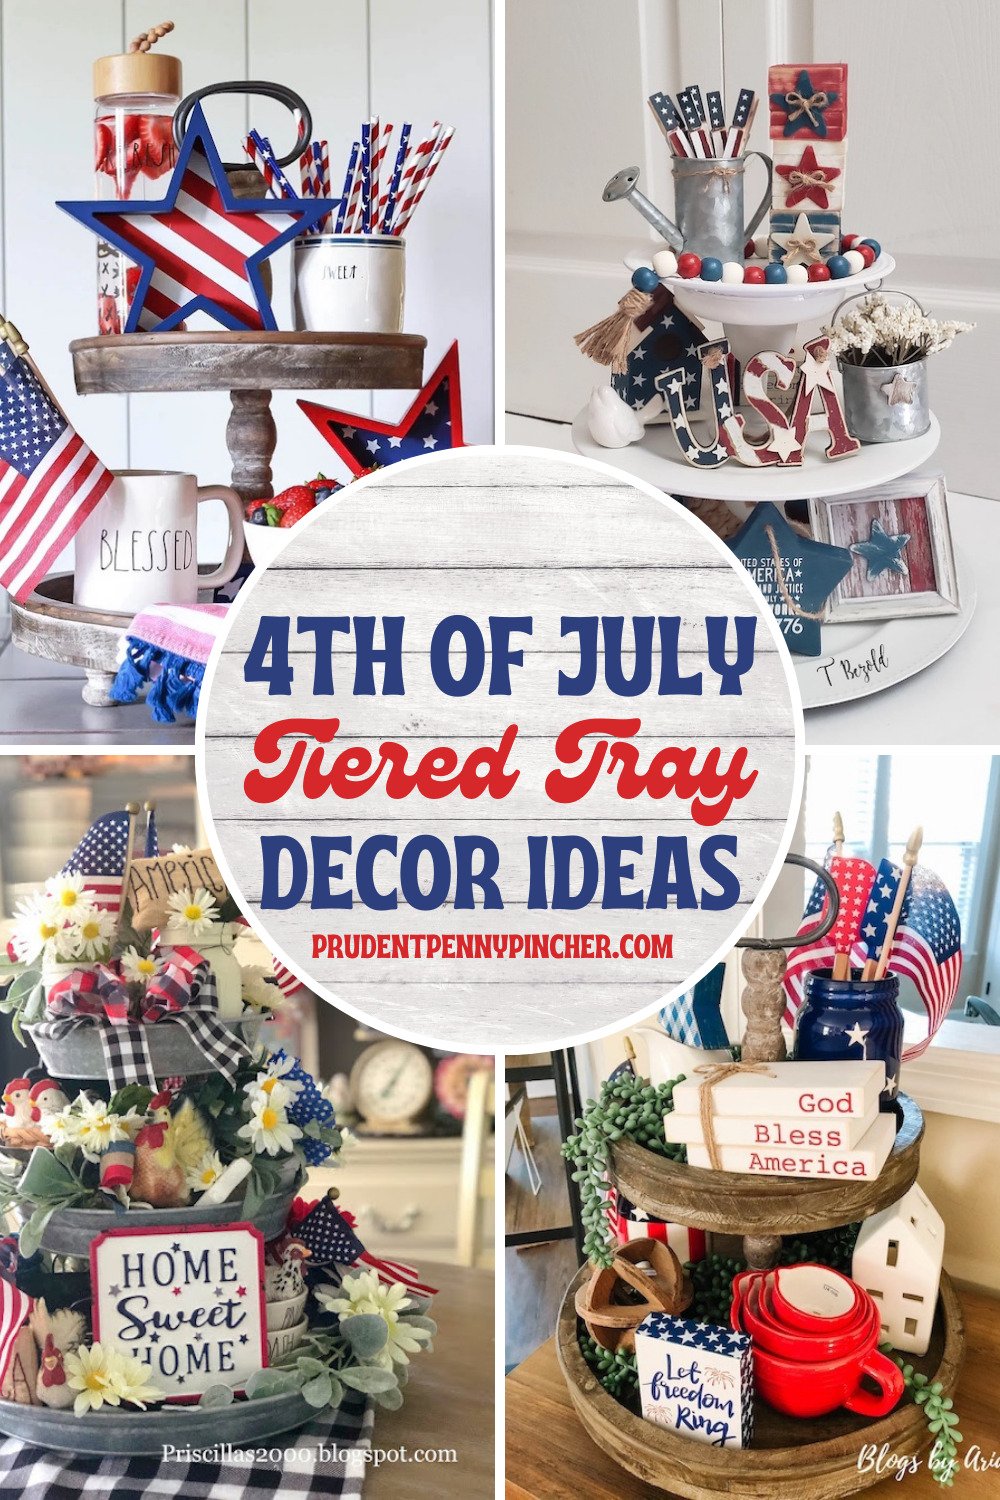 Mini solo cup Whipped parfaits Forth  of July Tier Tray Decor. 